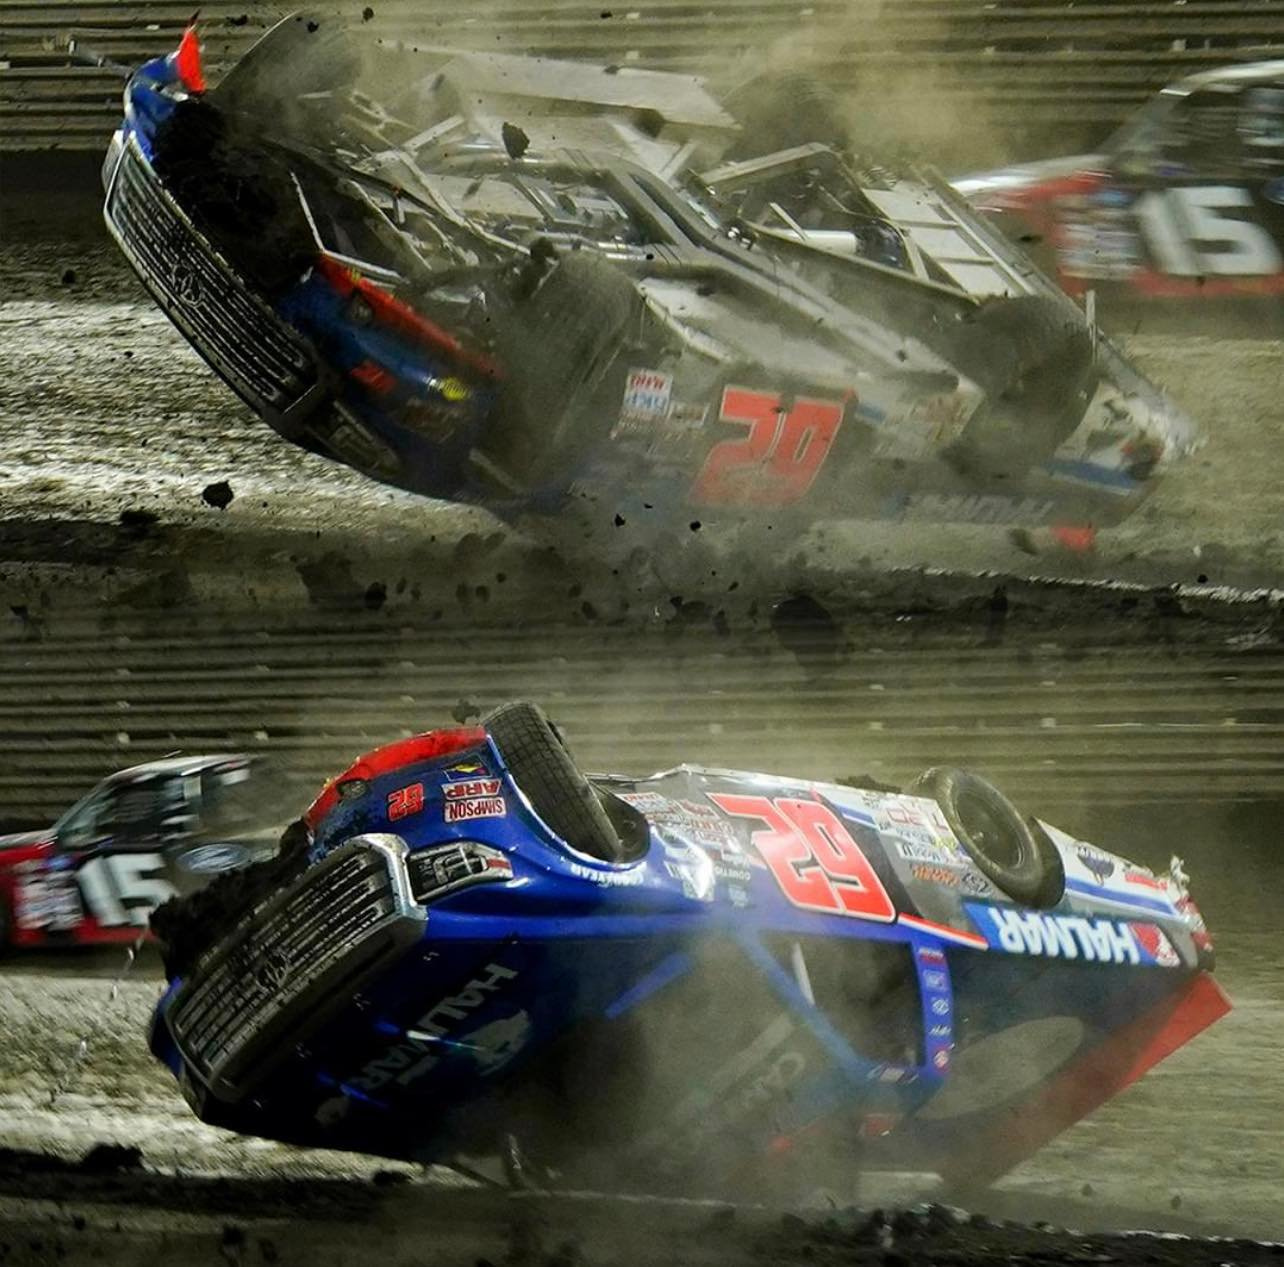 Jessica Friesen's Car After A Crash In the 2022 NASCAR Craftsman Truck Series At Knoxville Raceway